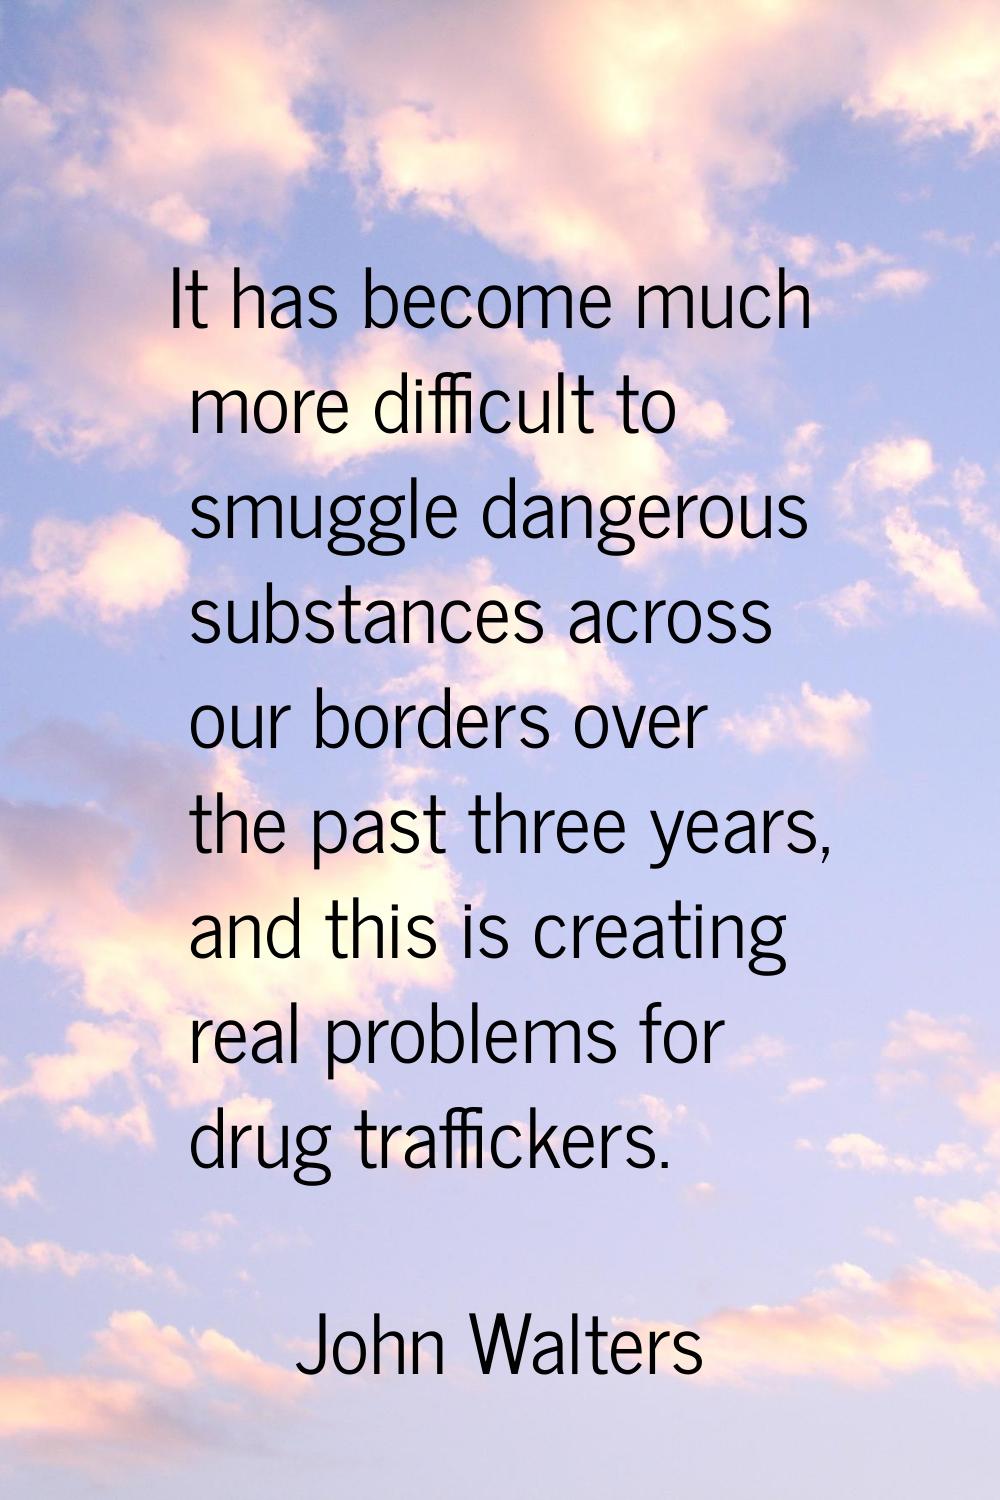 It has become much more difficult to smuggle dangerous substances across our borders over the past 